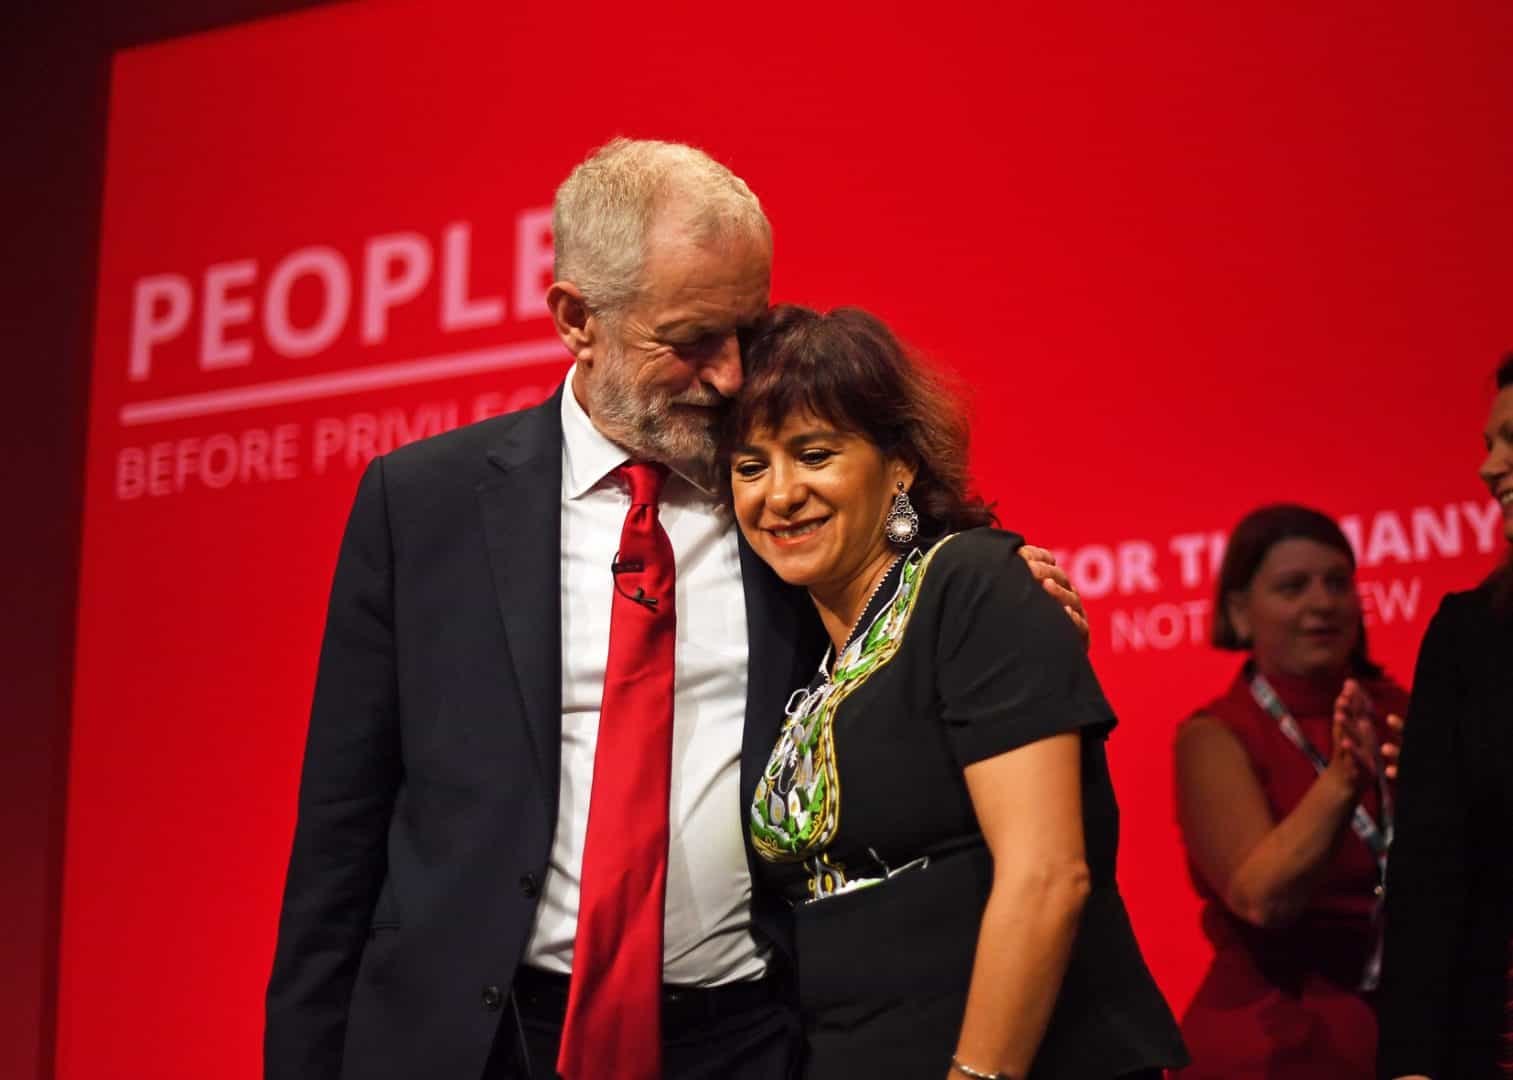 Jeremy Corbyn failed to win power but turned Labour to the left